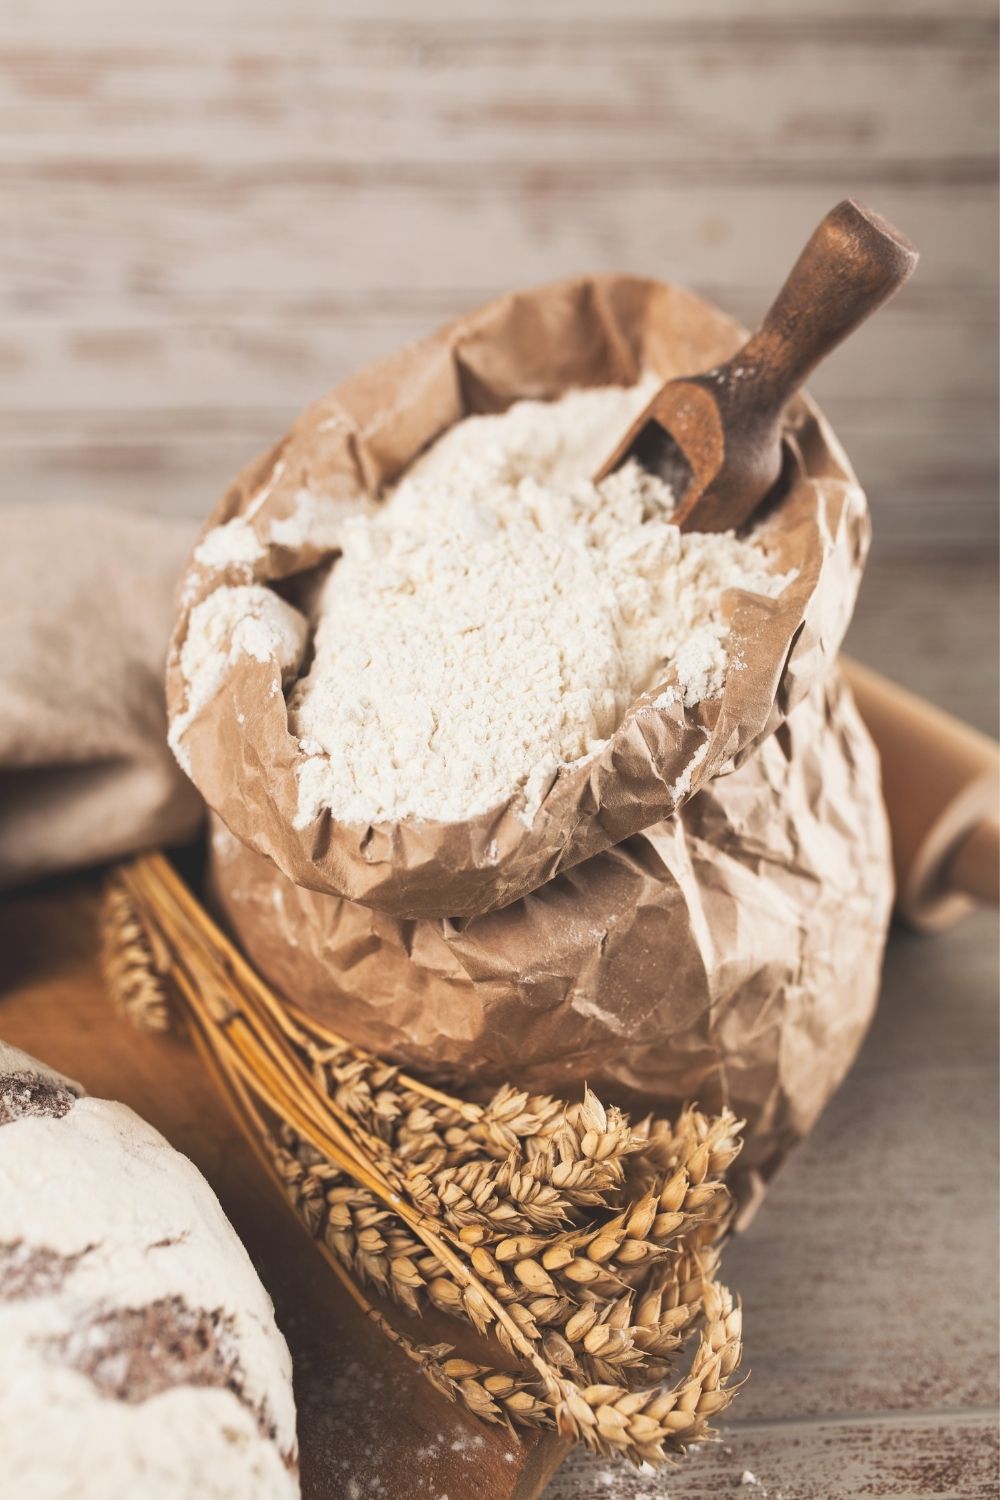 https://www.pantrymama.com/wp-content/uploads/2022/03/HOW-TO-PROPERLY-STORE-FLOUR-LONG-AND-SHORT-TERM-SOLUTIONS-1.jpg